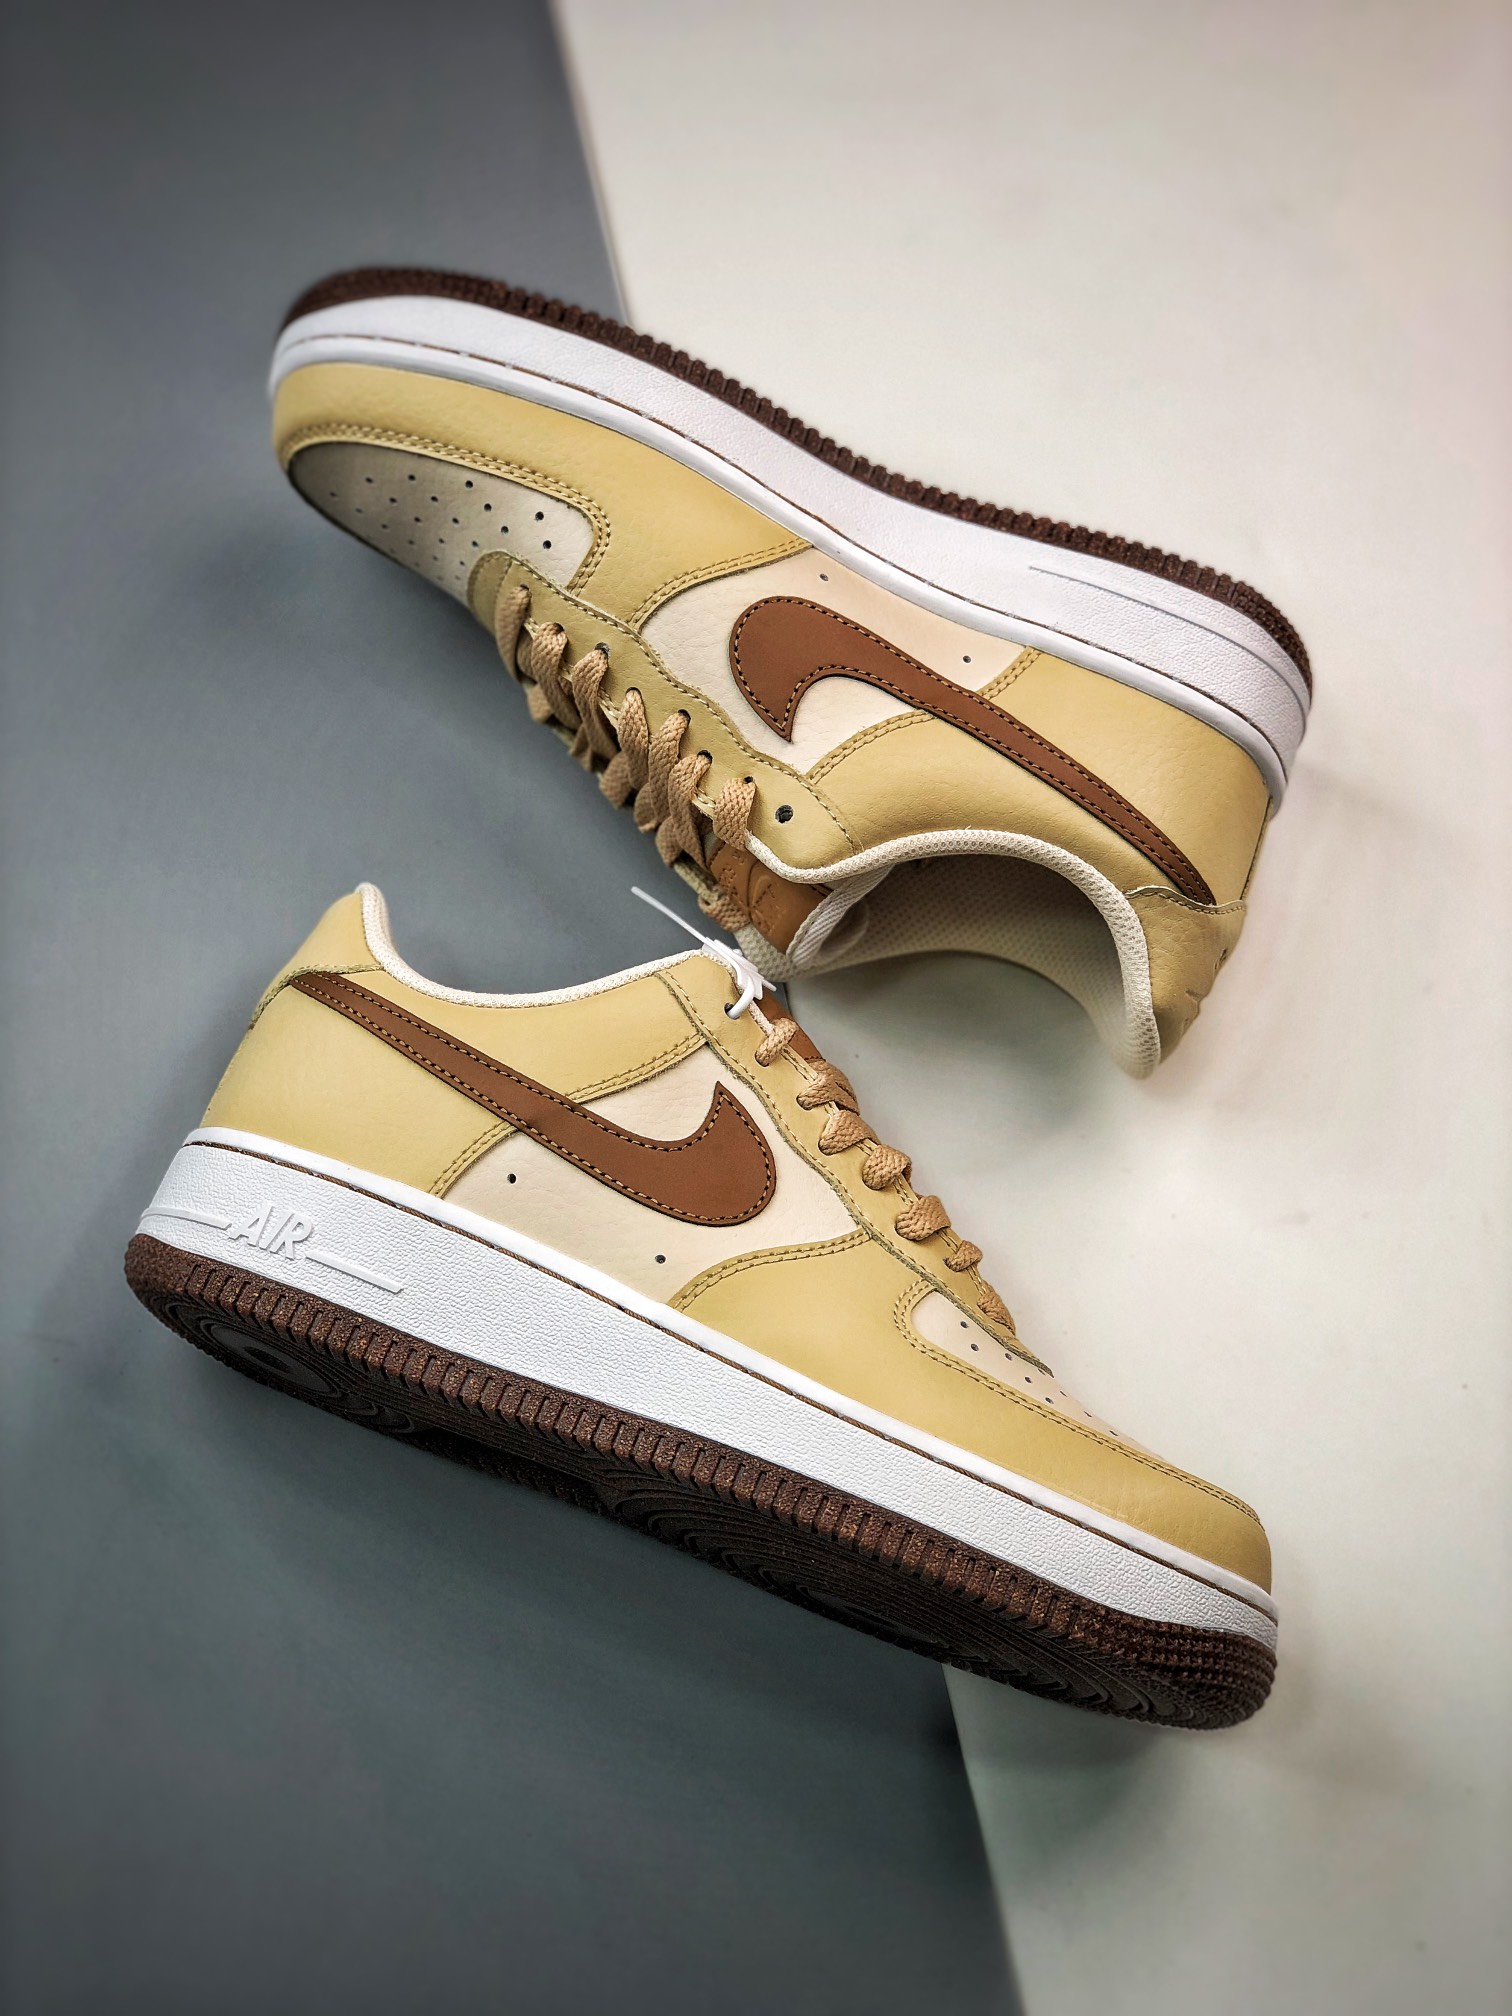 Nike DQ7660-200 Air Force 1 Low Inspected By Swoosh Mens Lifestyle Shoe -  Beige/Brown –